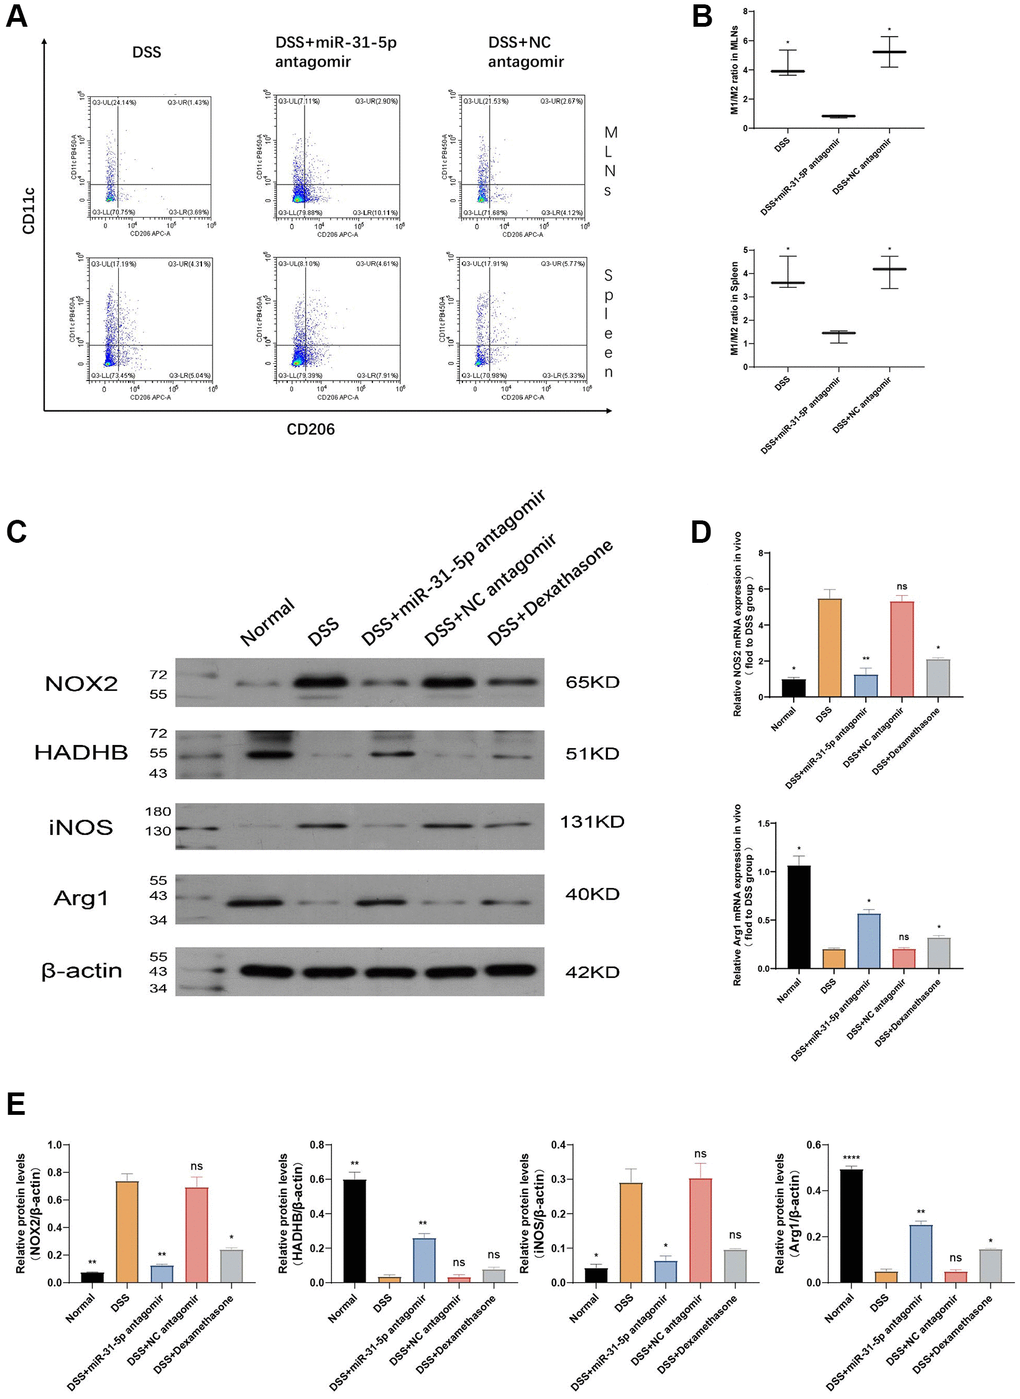 mir-31-5p antagomir may alleviate colitis in mice by transforming M1-type macrophages into M2-type macrophages. (A) The ratio of M1/M2 in spleen and lymphocytes was determined by flow cytometry. (B) Statistical analysis of M1/M2 ratio in spleen and lymphocytes. (C) The expressions of NOX2, HADHB, iNOS, Arg1 and β-catenin proteins in colon were analyzed by Western blotting. (D) The mRNA expression of M1-type and M2-type macrophage marker genes was detected by qPCR. (E) Statistical analysis of protein expression levels of NOX2/β-actin, HADHB/β-actin, iNOS2/β-actin and Arg1/β-actin. Each bar represents mean ± SD, n ≥ 5 from each group. Ns represented P > 0.05, *P **P ***P ****P 